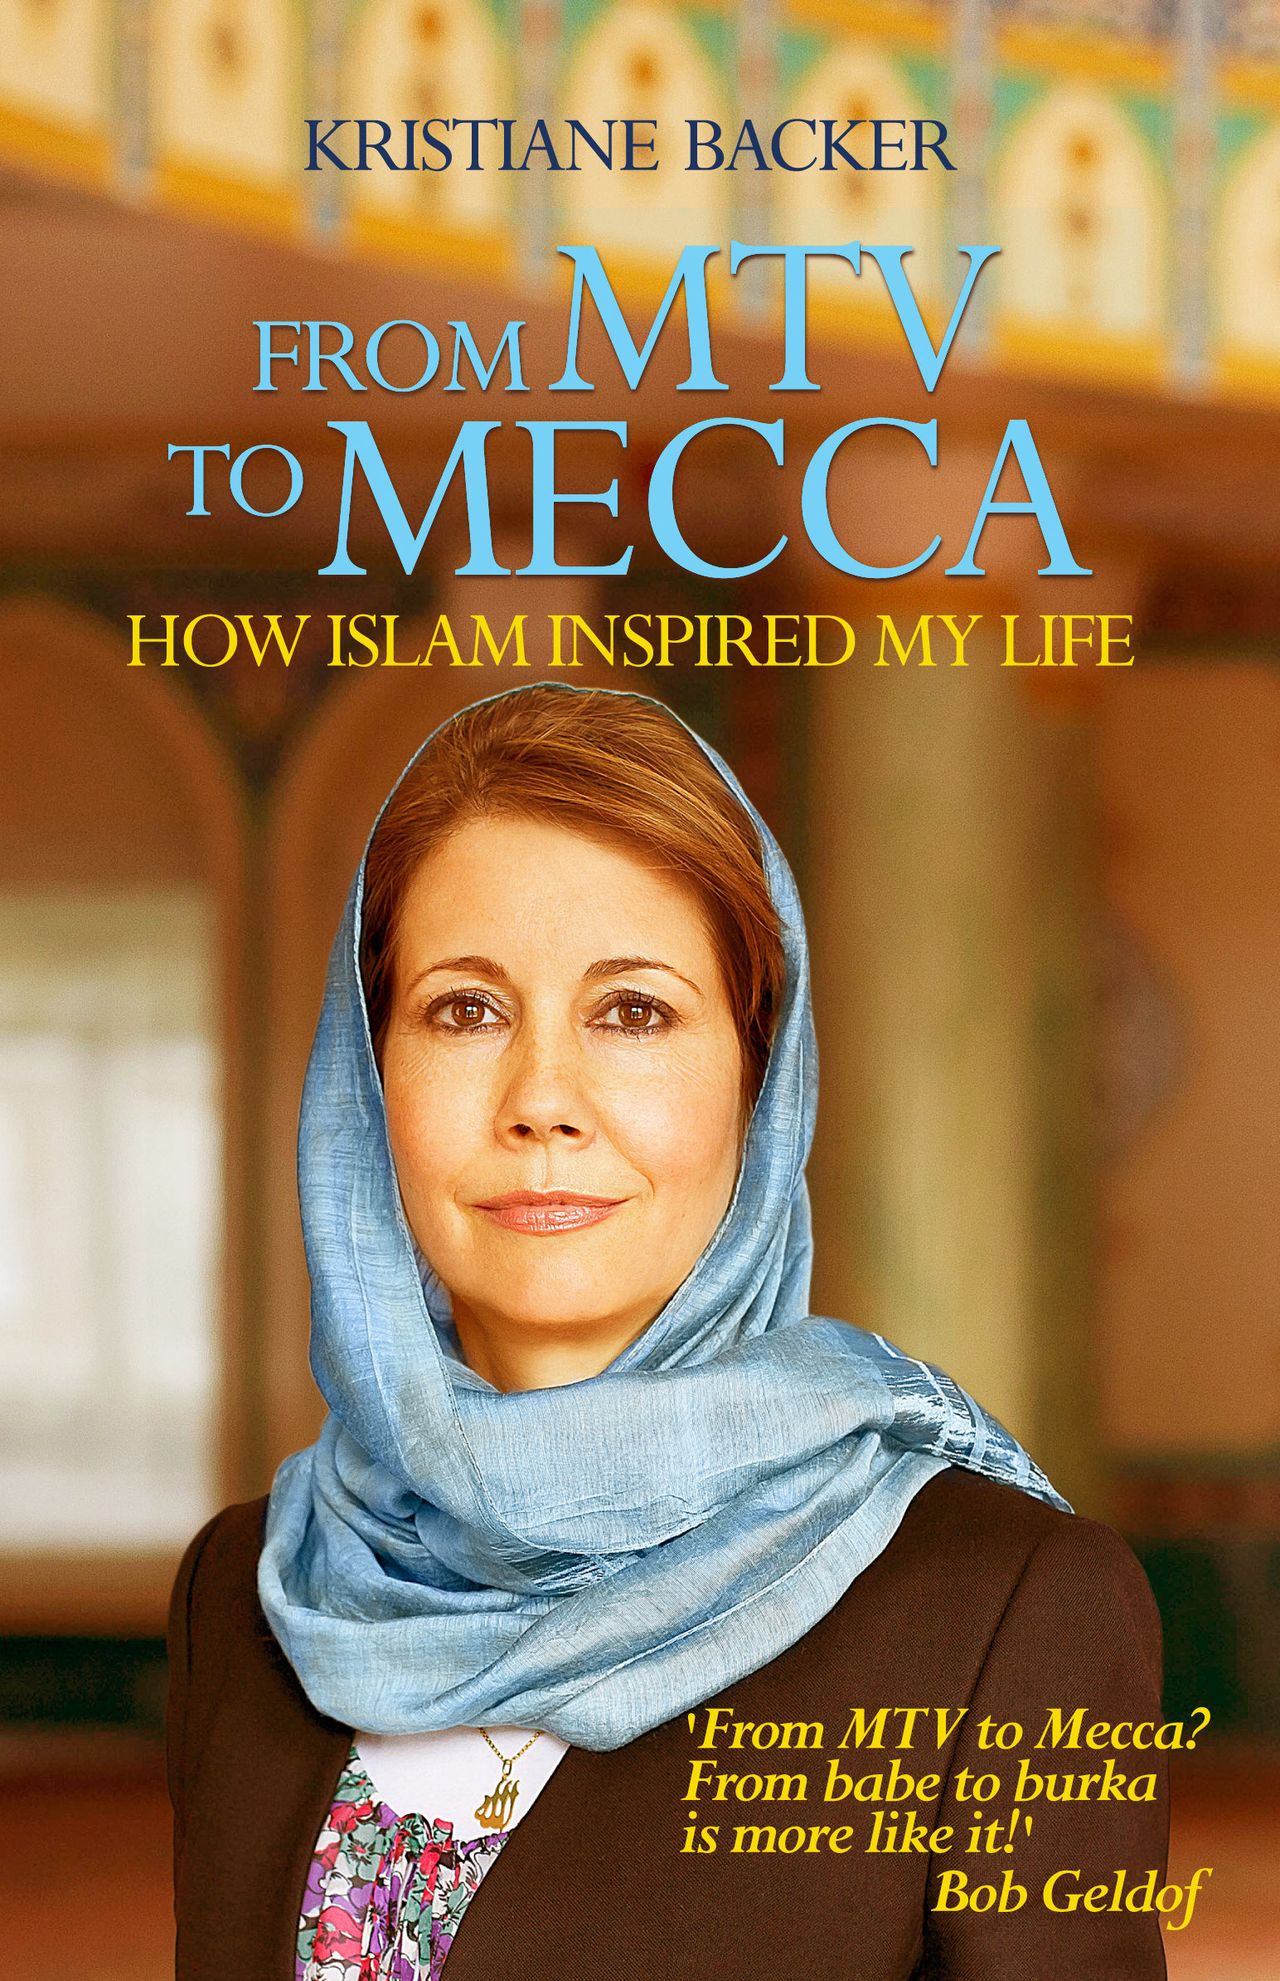 Kristiane Backer as featured on the cover of her book, From MTV to Mecca: How Islam Inspired My Life.